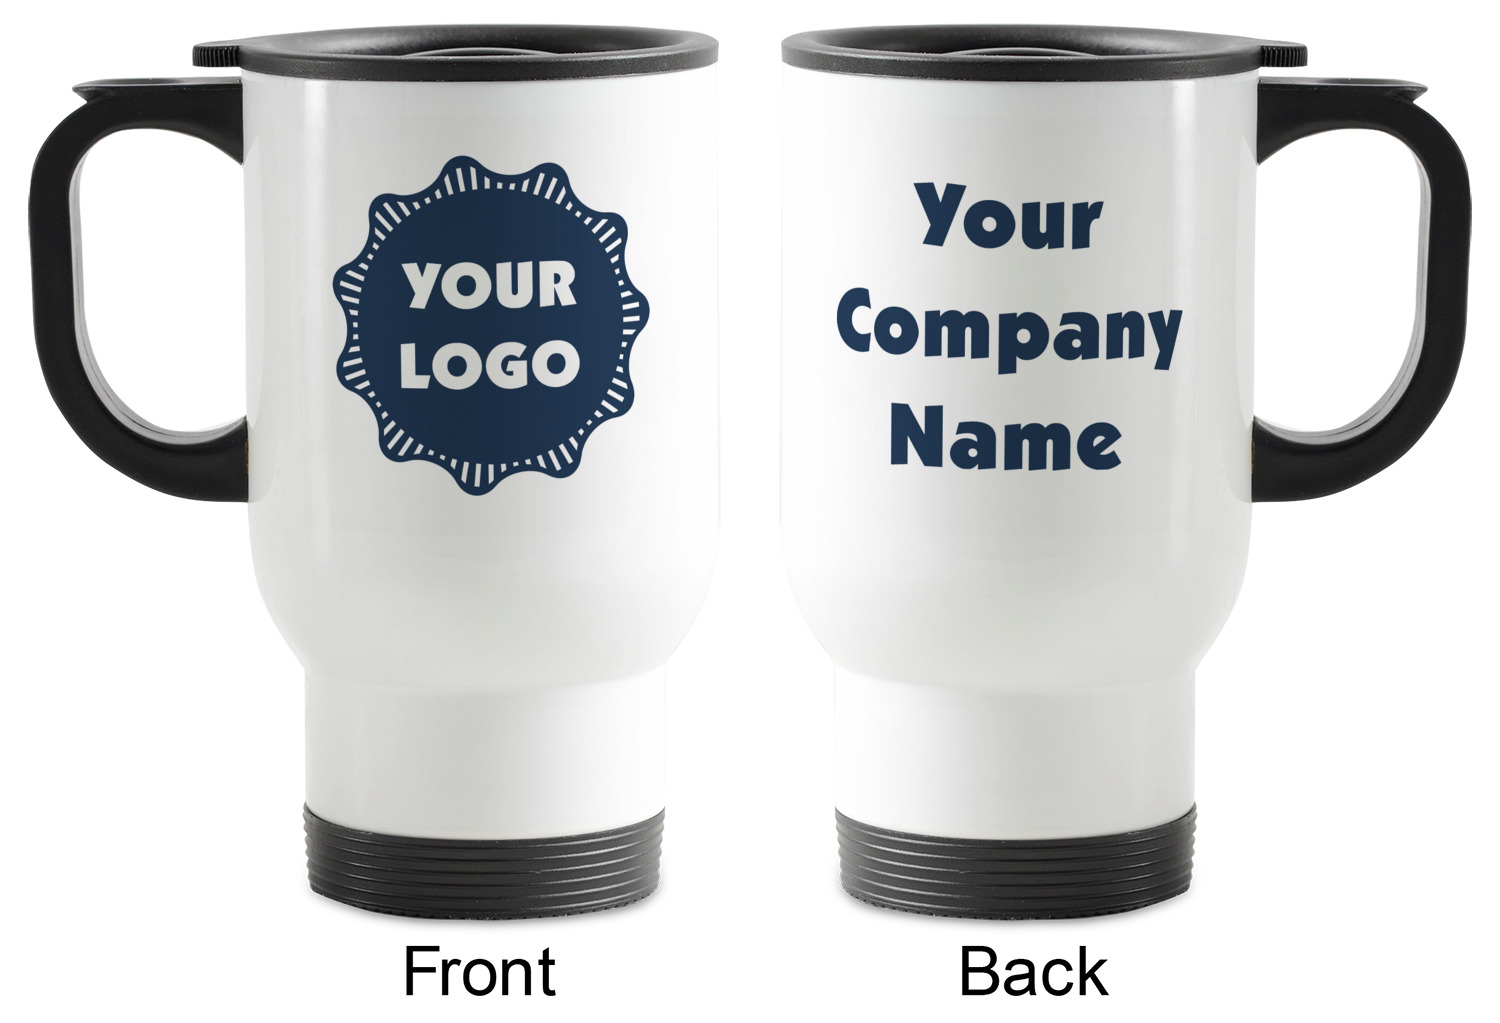 https://www.youcustomizeit.com/common/MAKE/6666411/Logo-Stainless-Steel-Travel-Mug-with-Handle-Front-Back.jpg?lm=1686946838